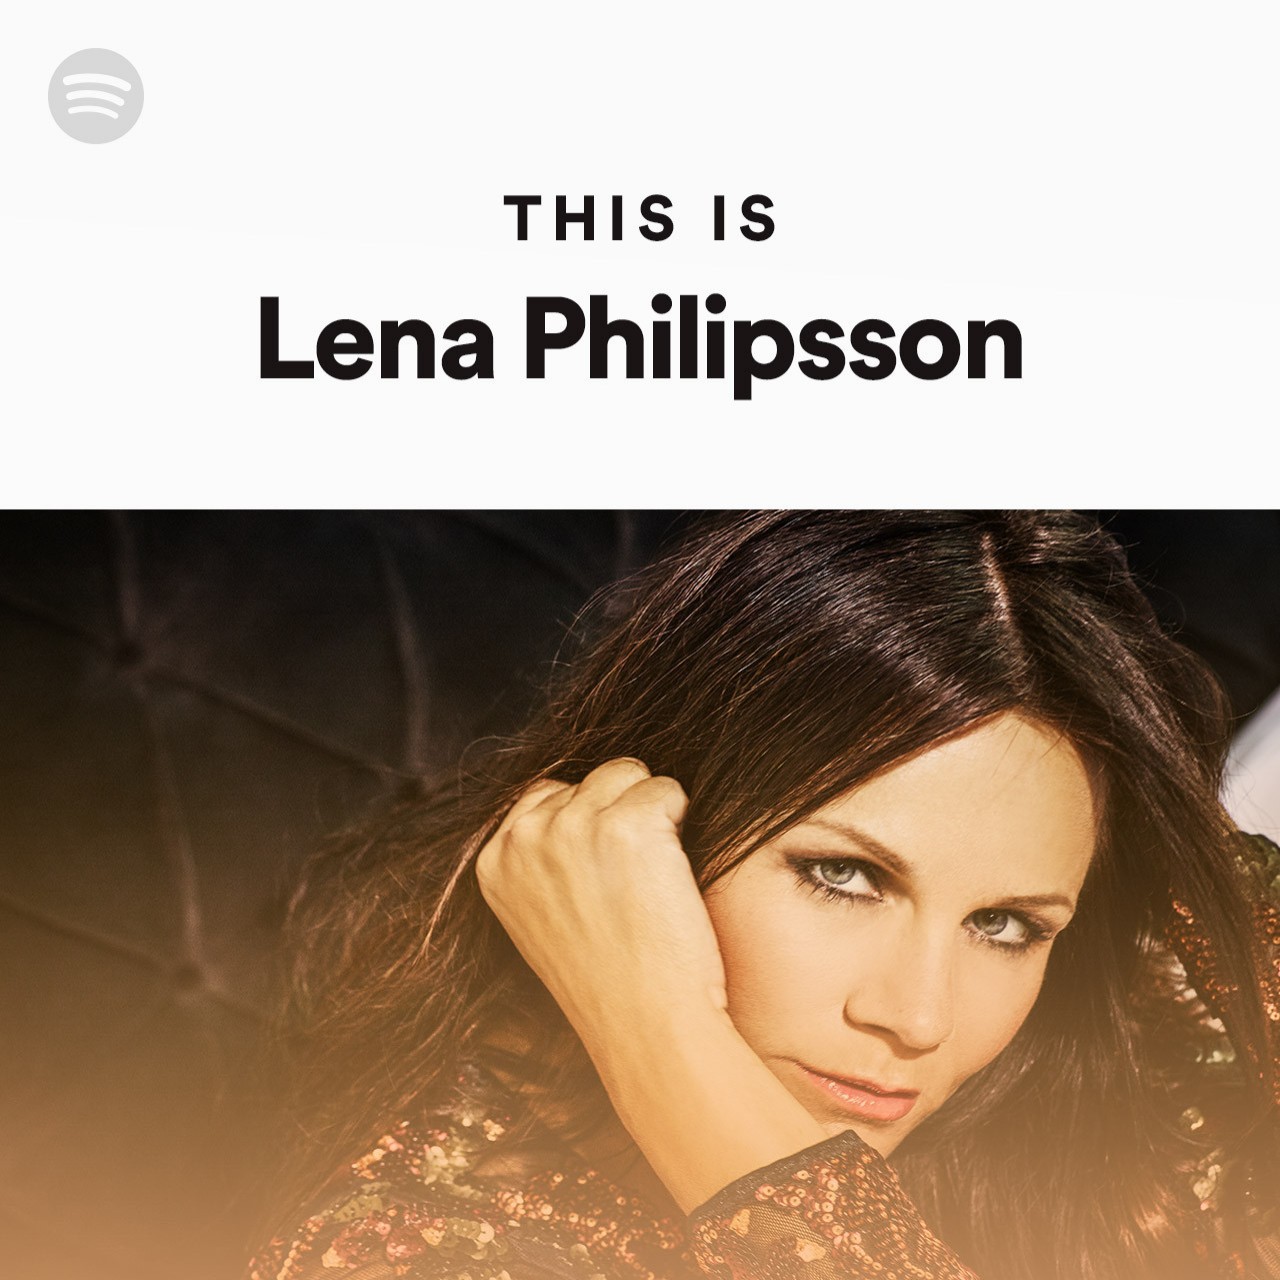 This Is Lena Philipsson